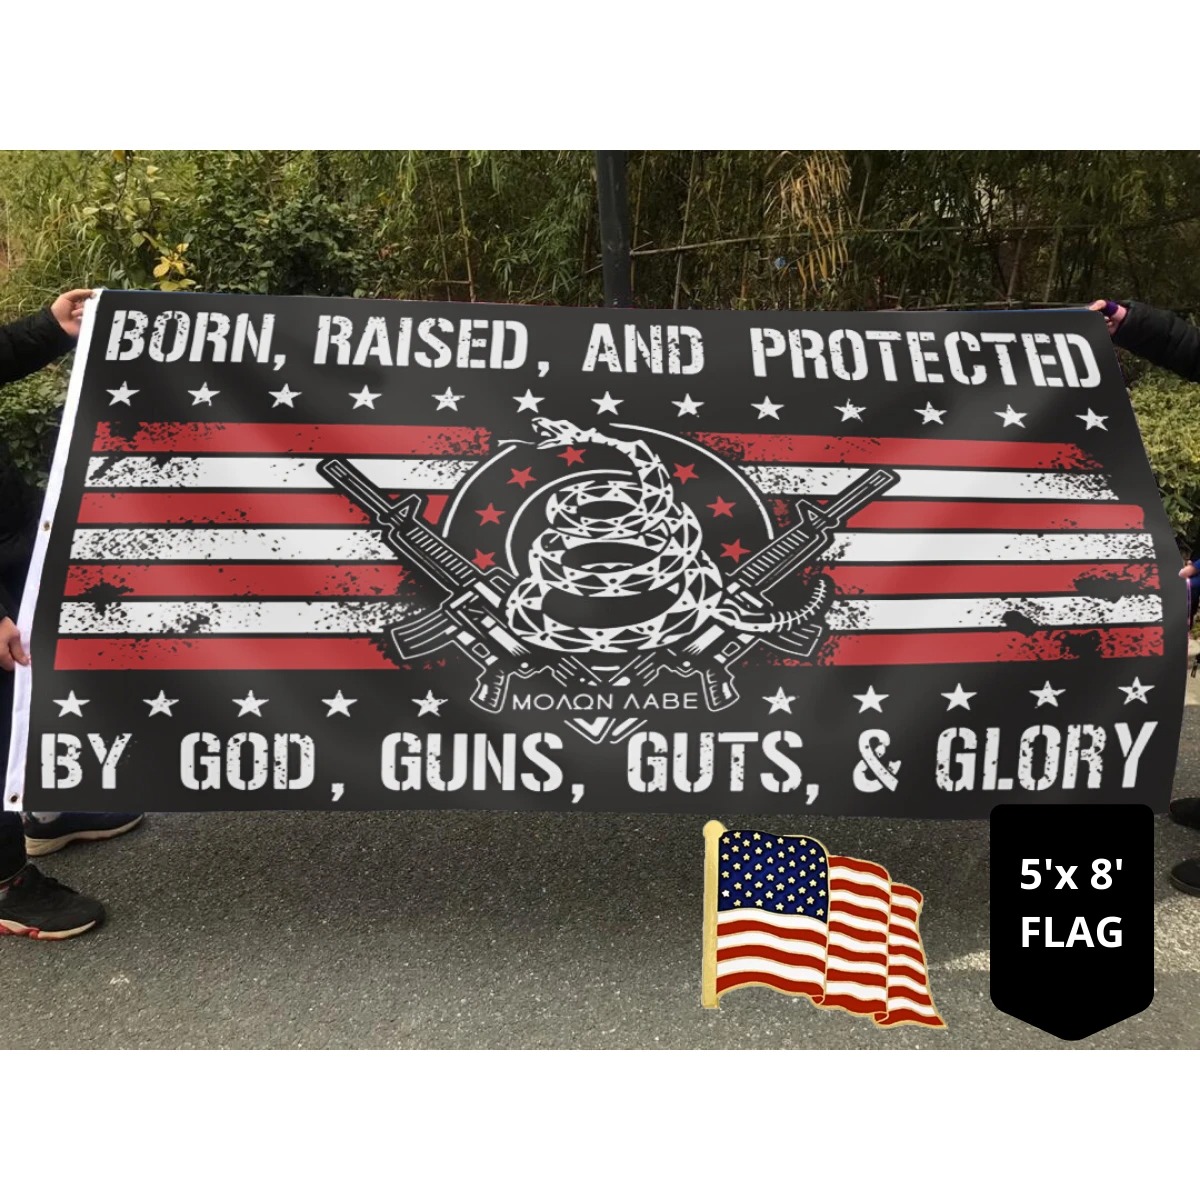 Born raised and protected by god guns guts and glory flag3